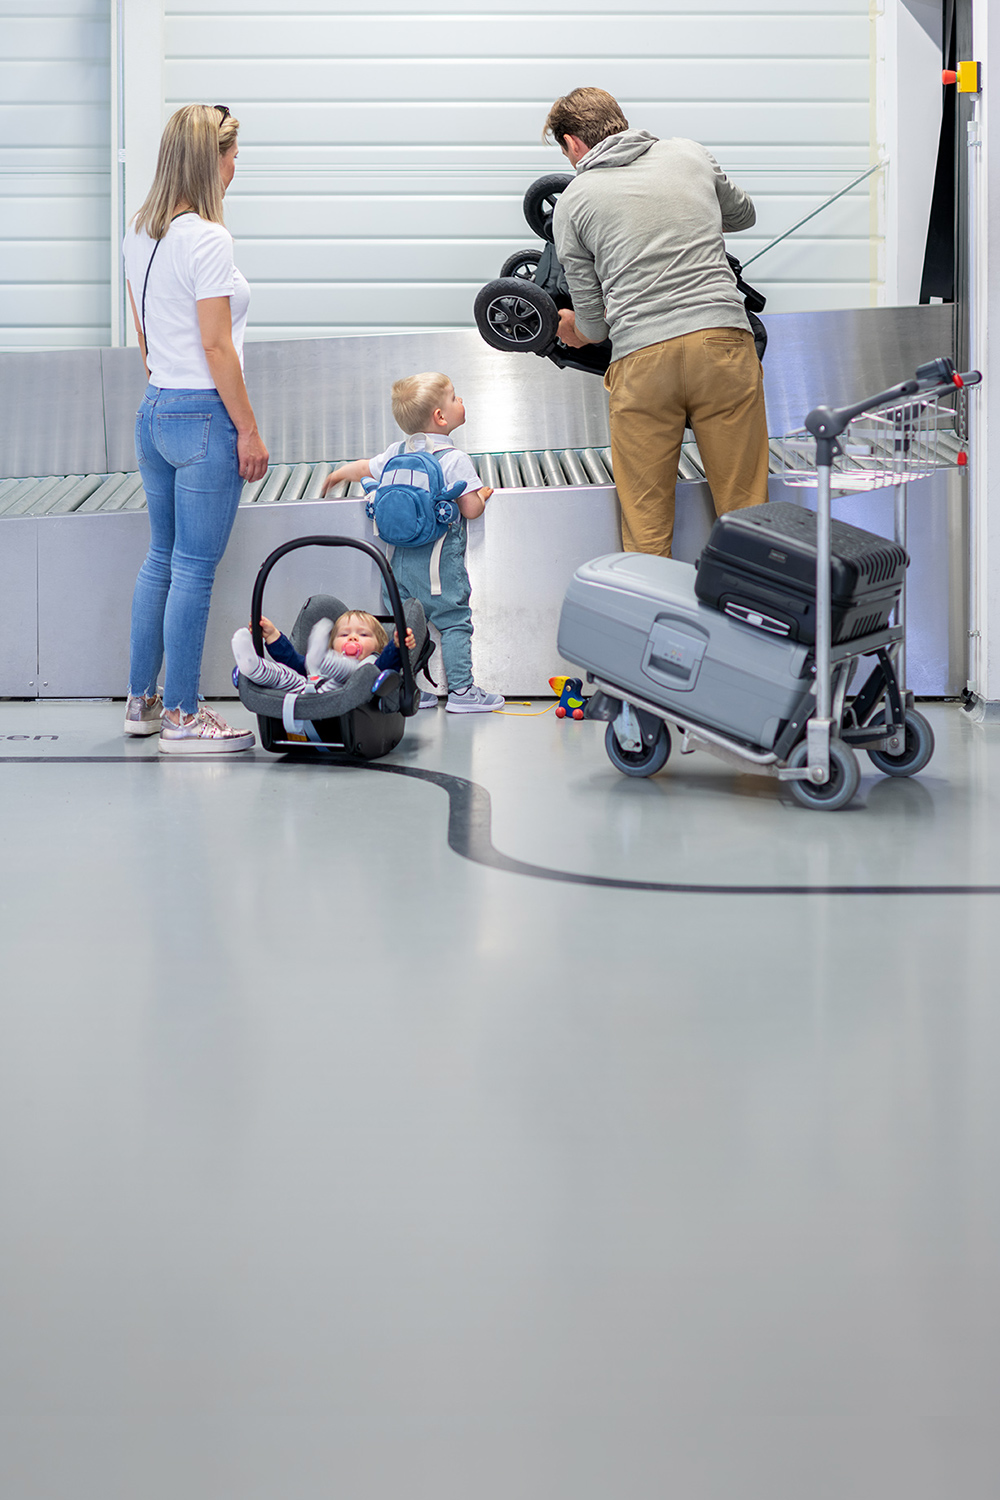 Person in front of suitcase strap with oversized baggage